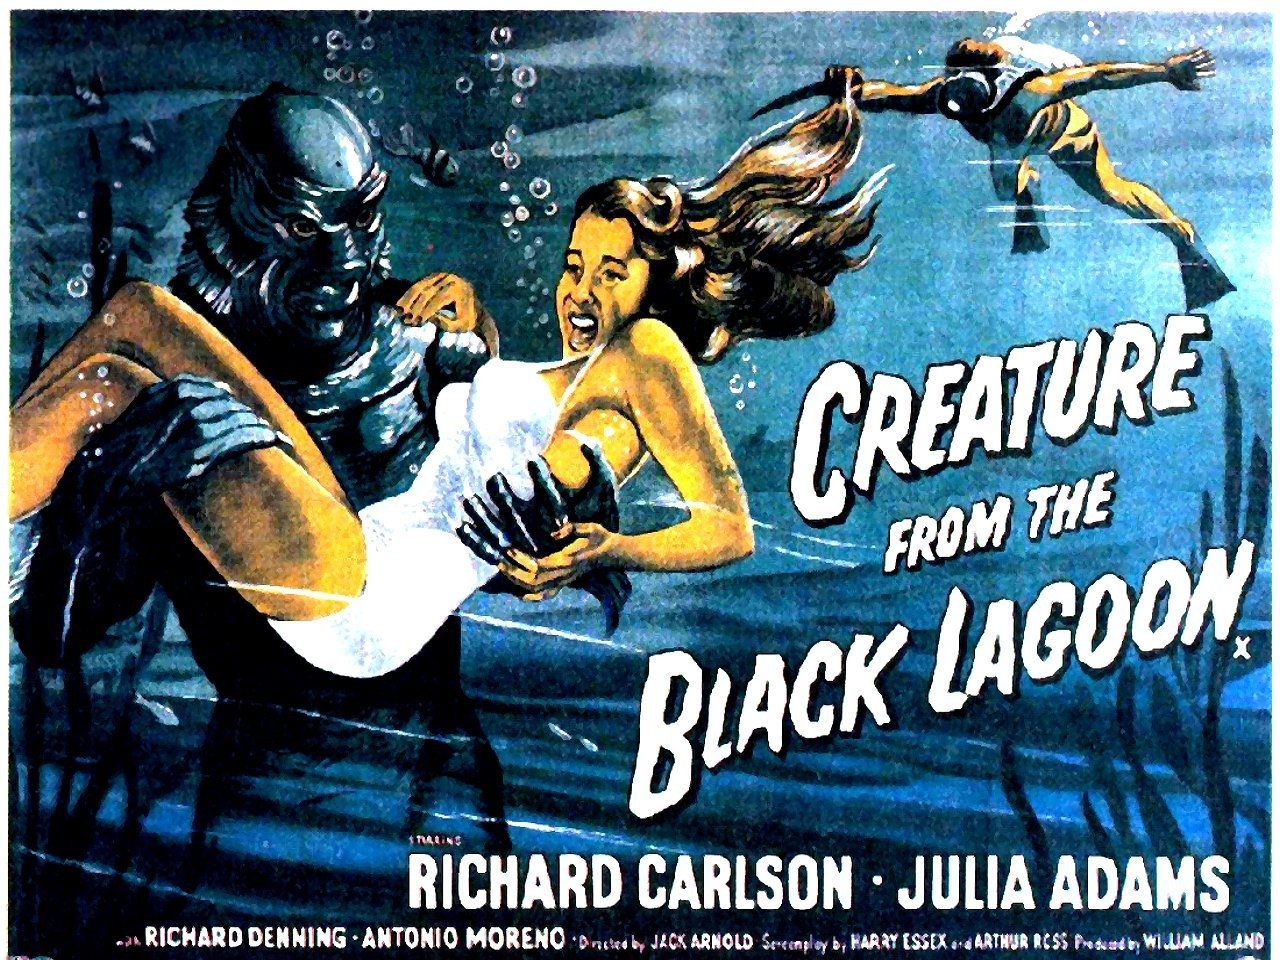 Creature From The Black Lagoon Images. 